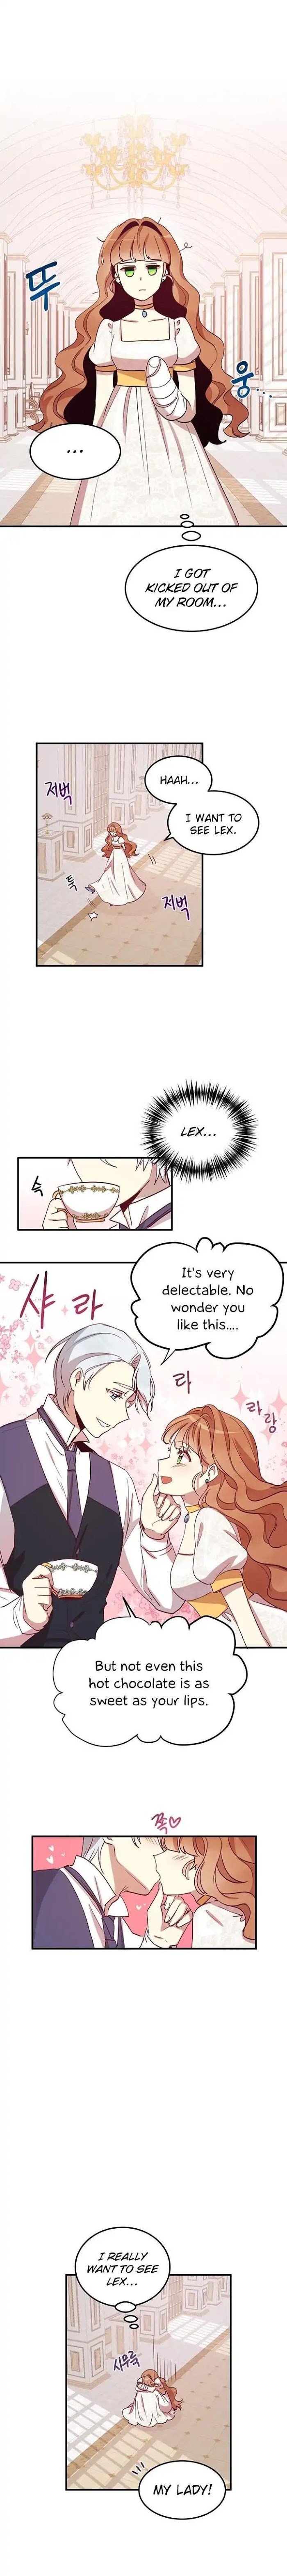 Why Are You Doing This, My Duke!? Webtoon - chapter 12 - #6